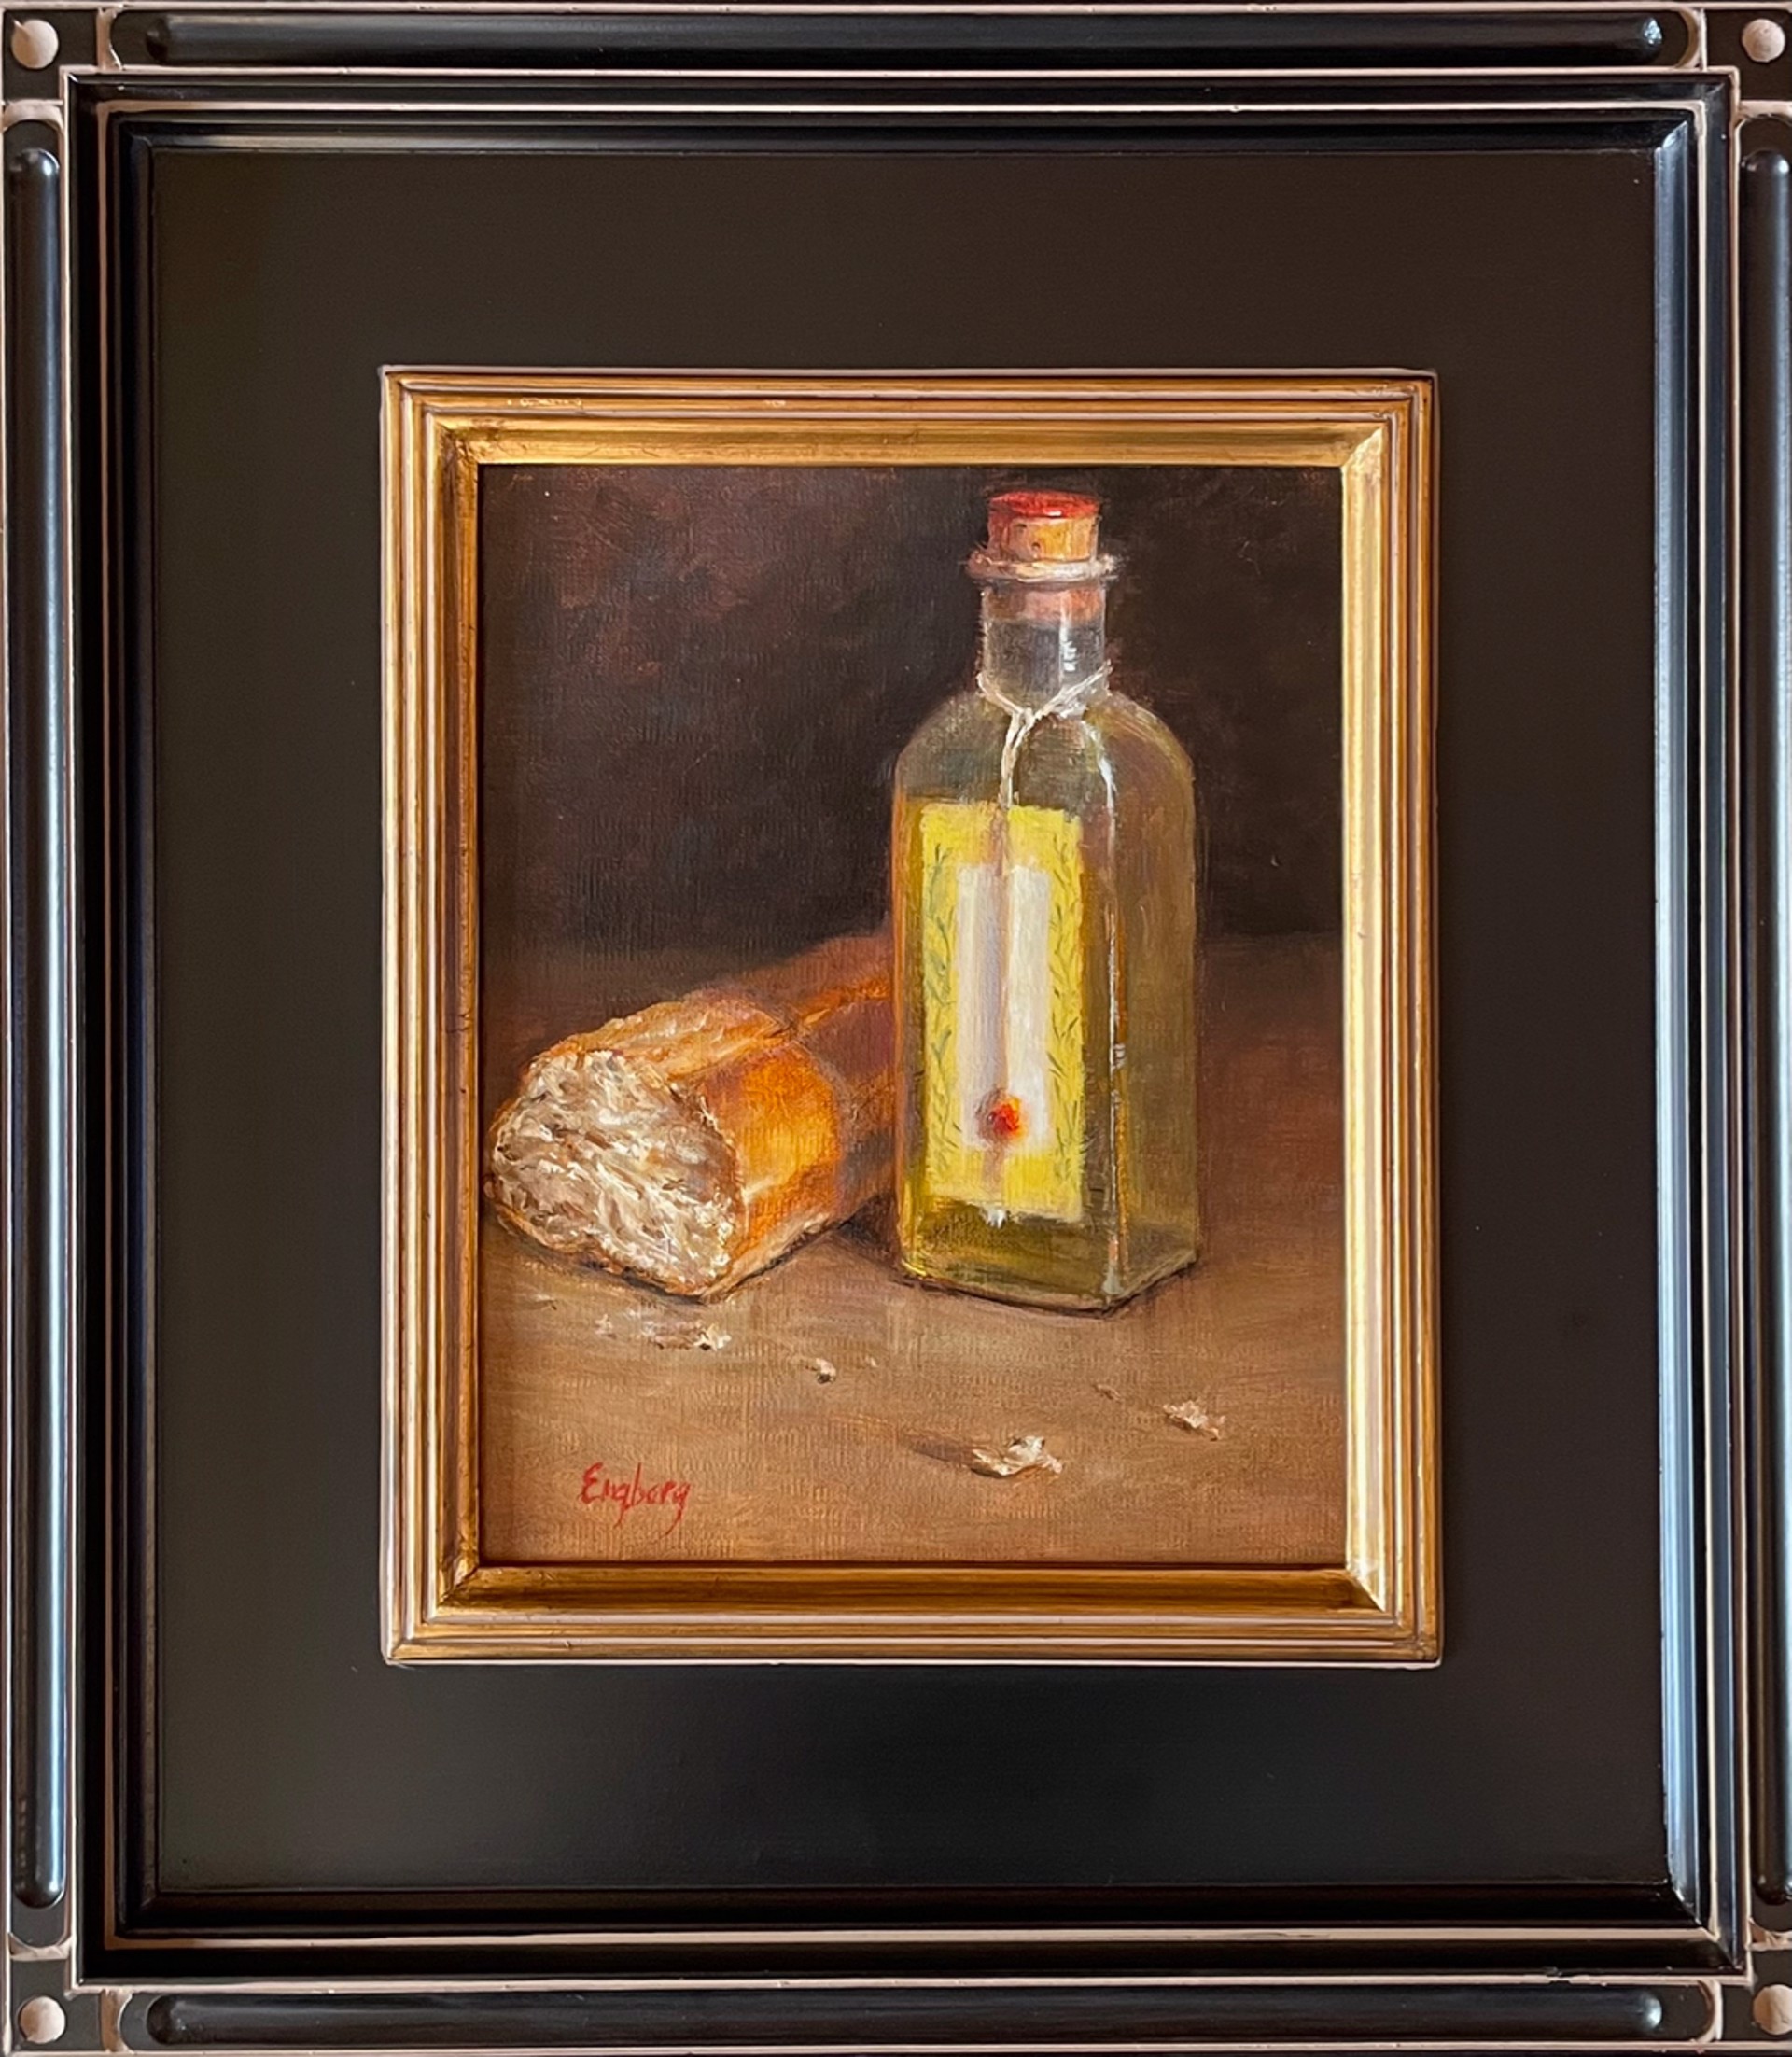 Baguette and Olive Oil by Lois Engberg